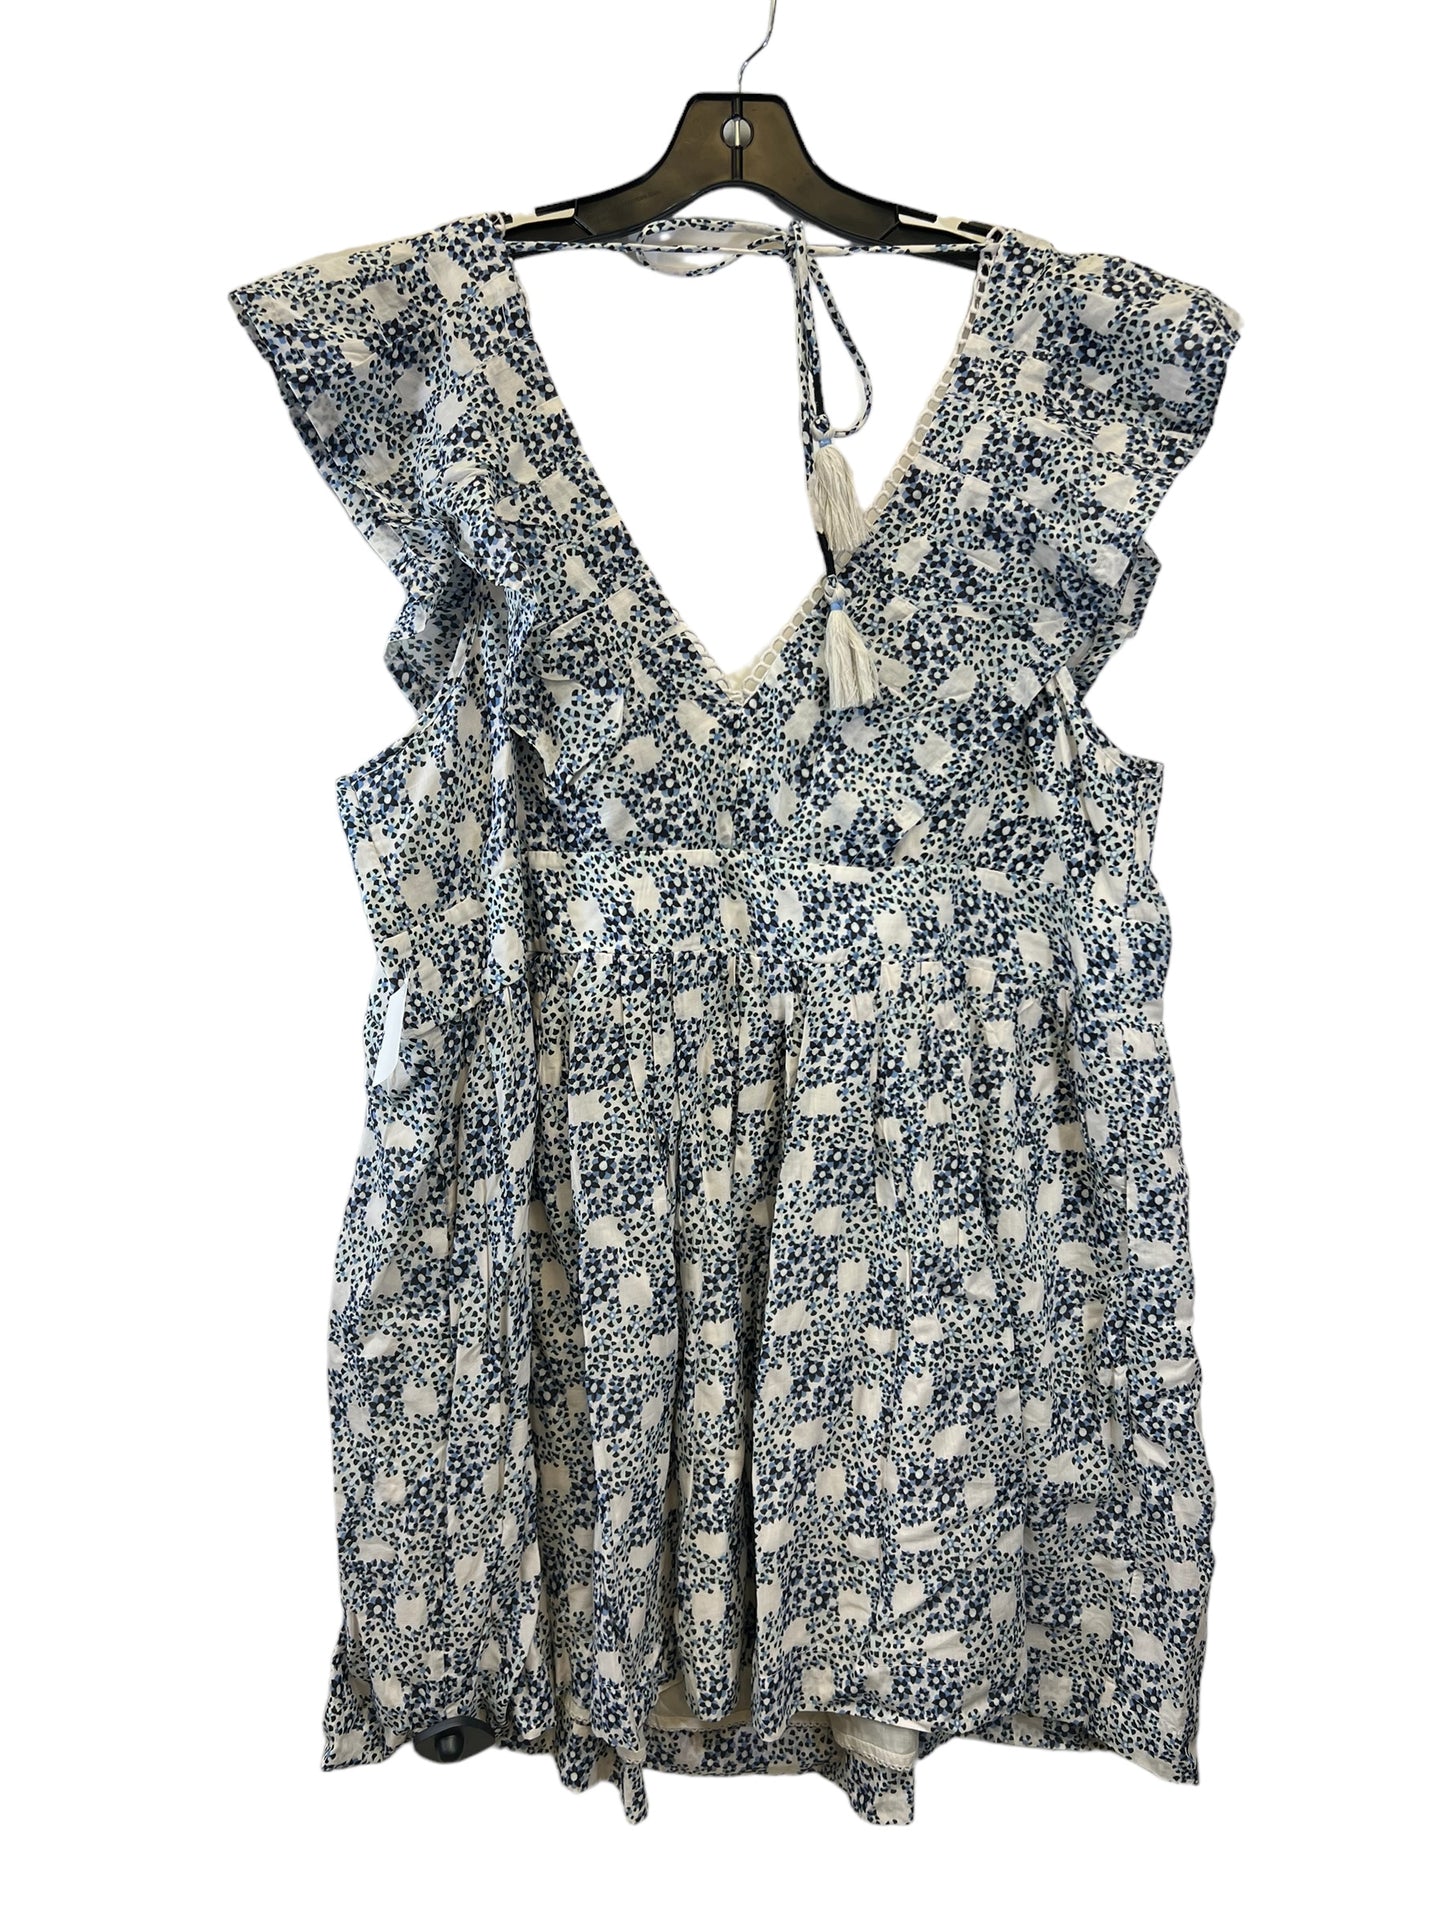 Dress Casual Short By Anthropologie  Size: 1x